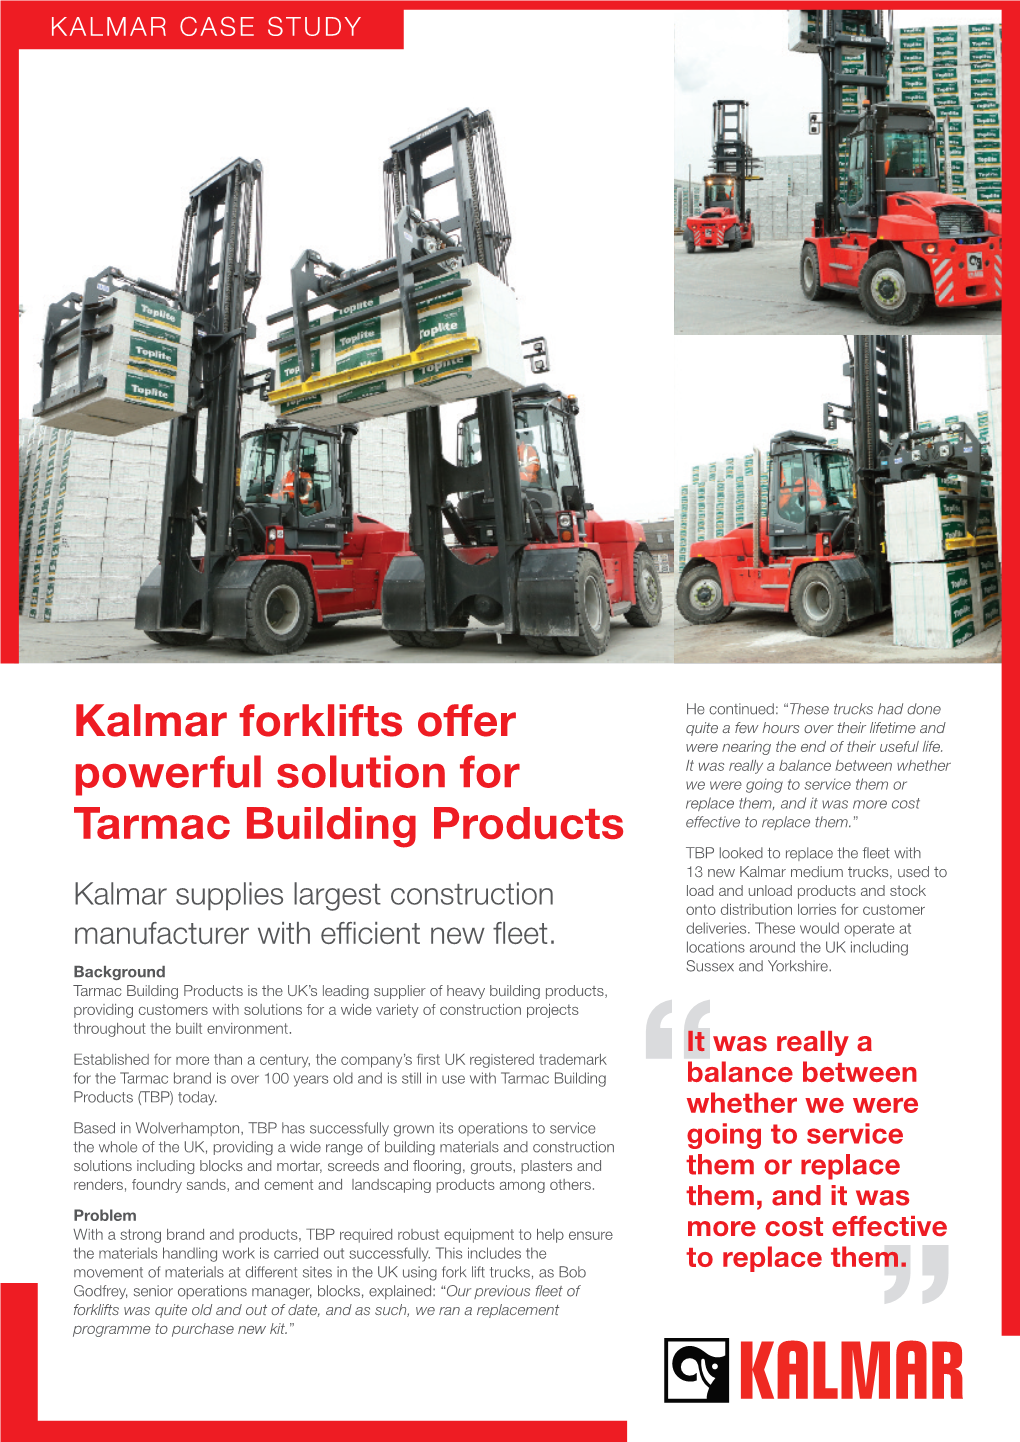 Kalmar Forklifts Offer Powerful Solution for Tarmac Building Products